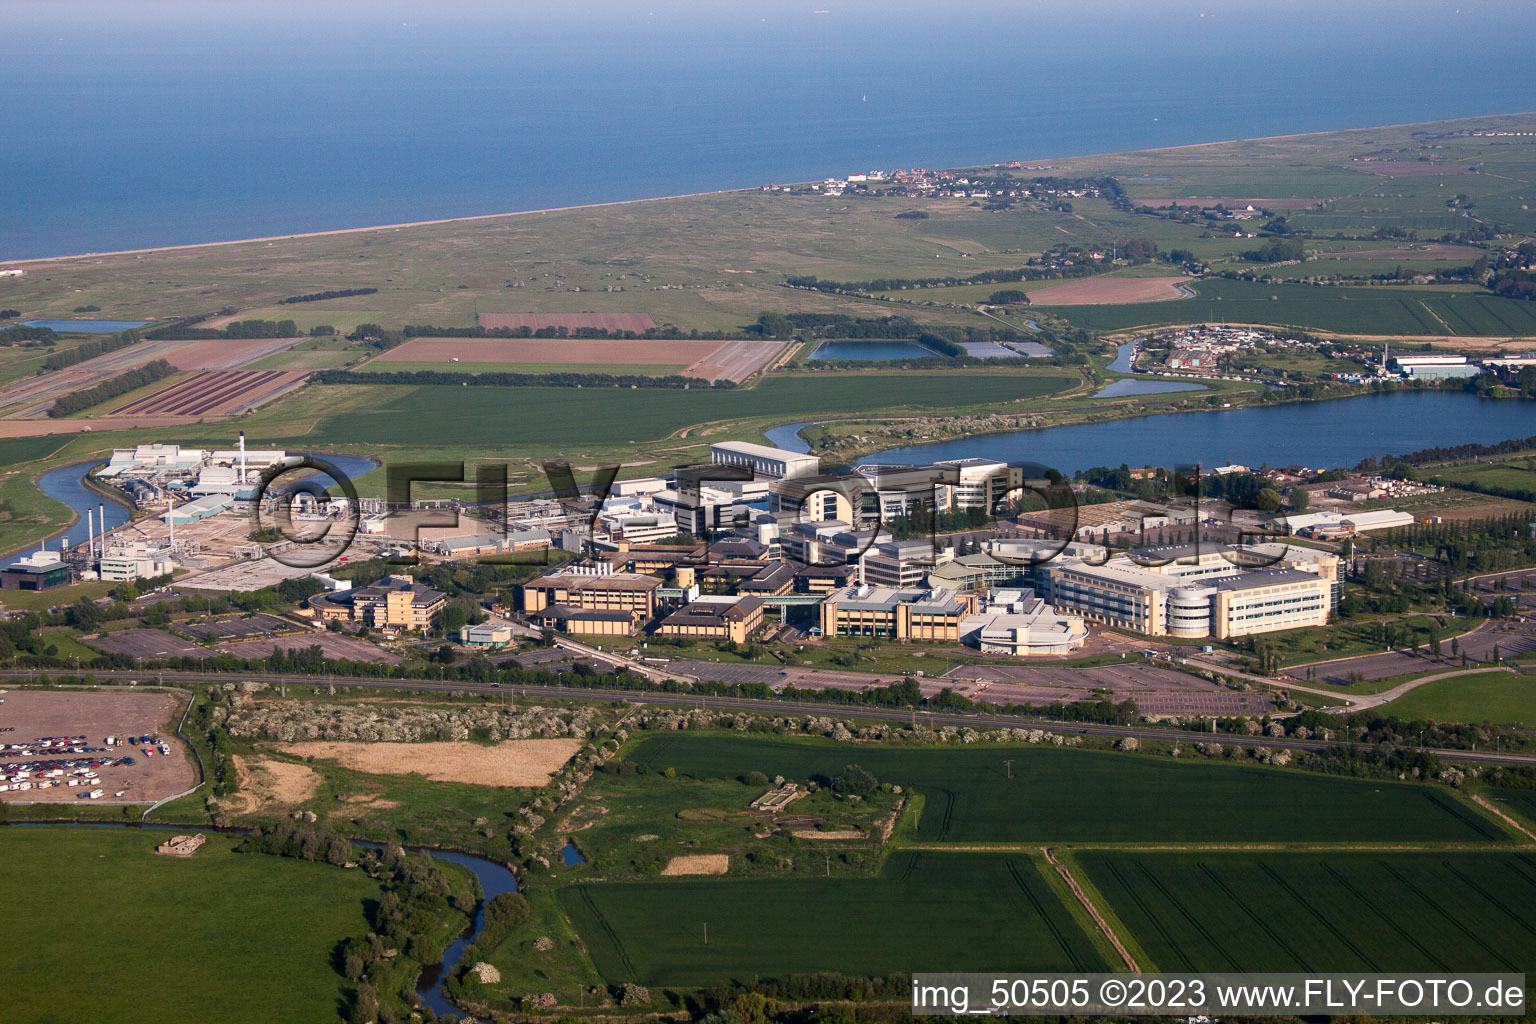 Building and production halls on the premises of the chemical manufacturers Pfizer Ltd and Discovery Park in Sandwich in England, United Kingdom